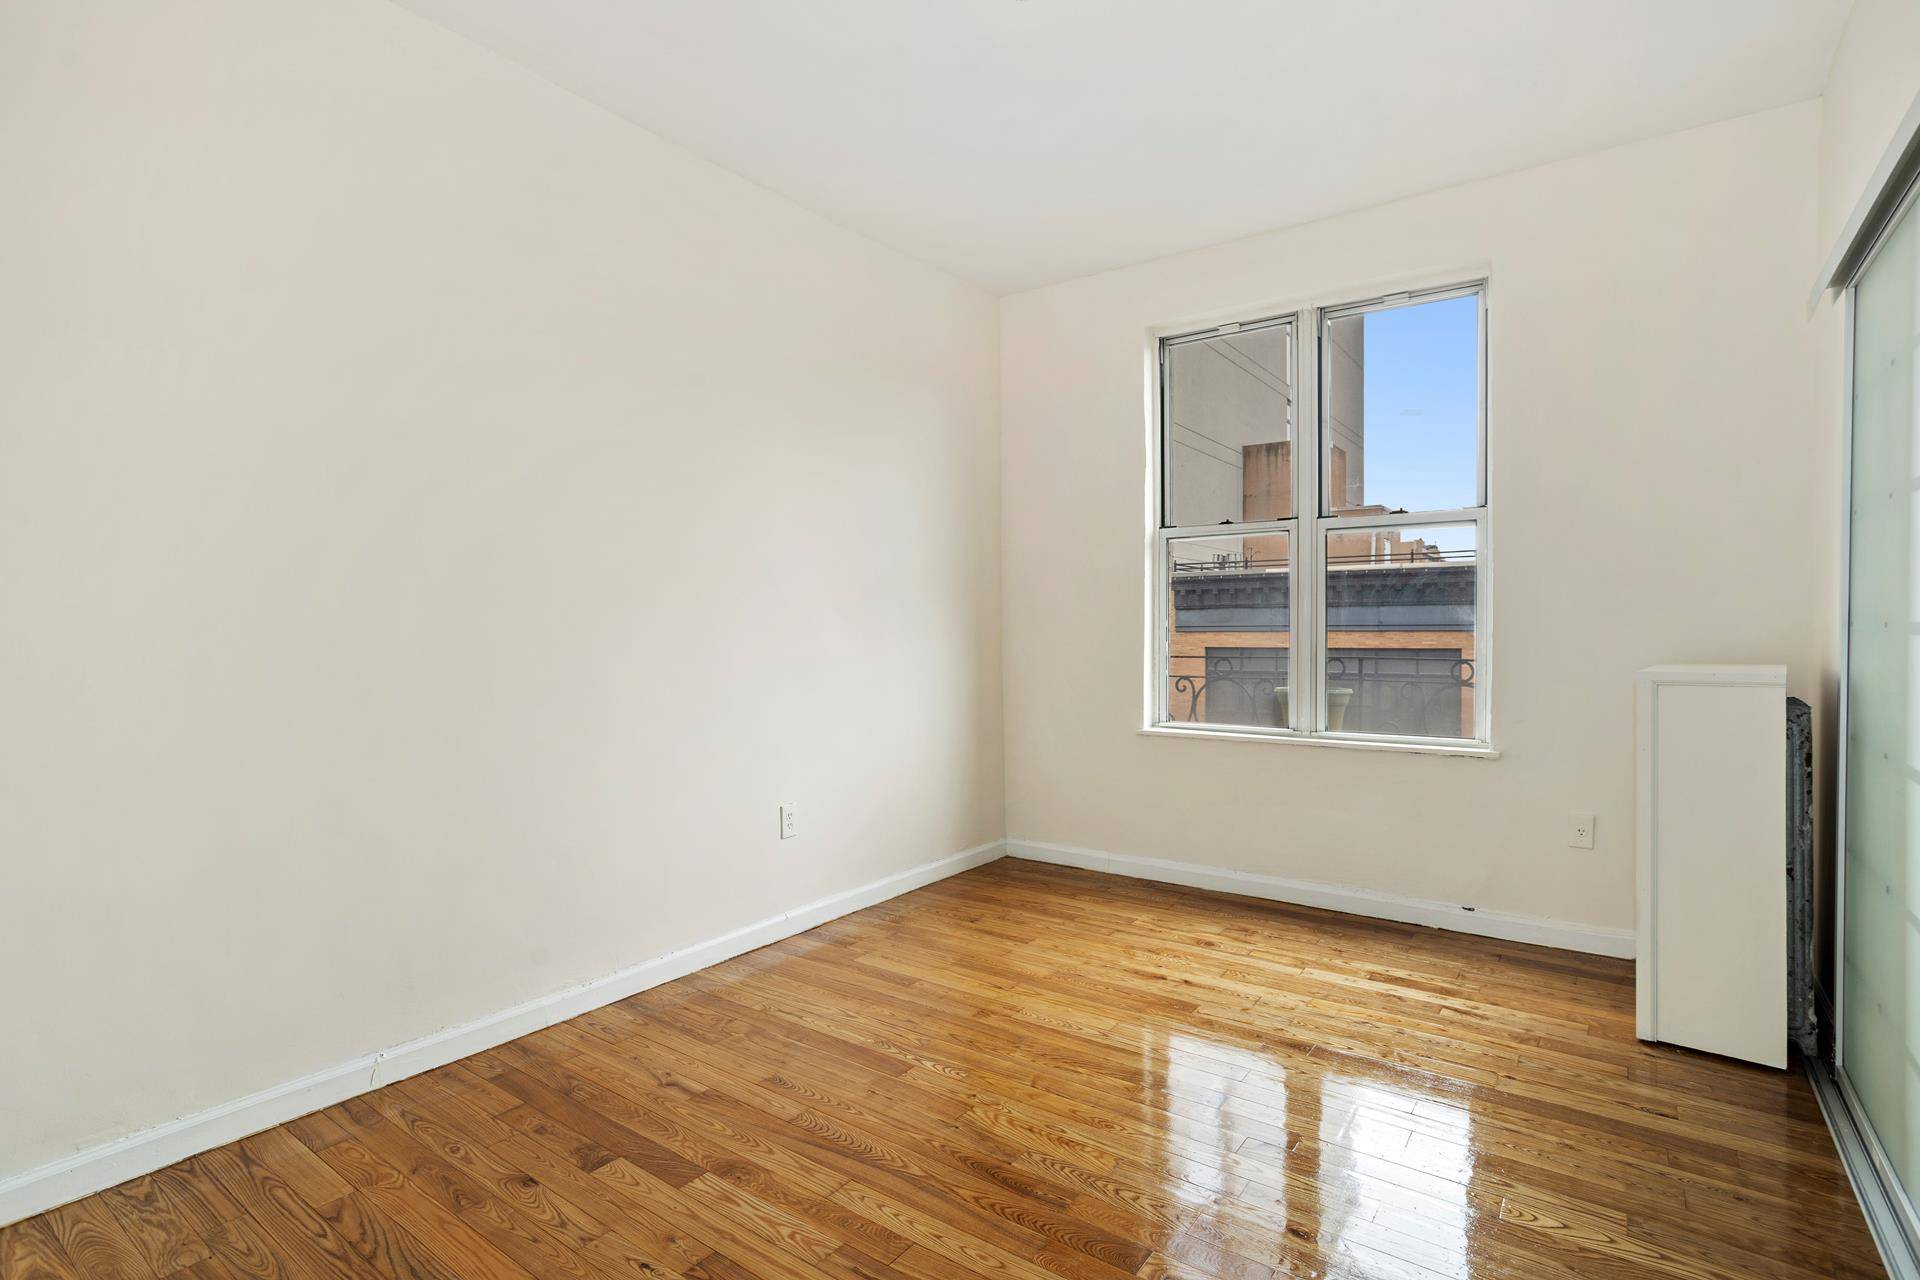 South Harlem off Frederick Douglass Blvd this immaculate bright 2 bedrooms apartment is in mint condition and Features south exposures.